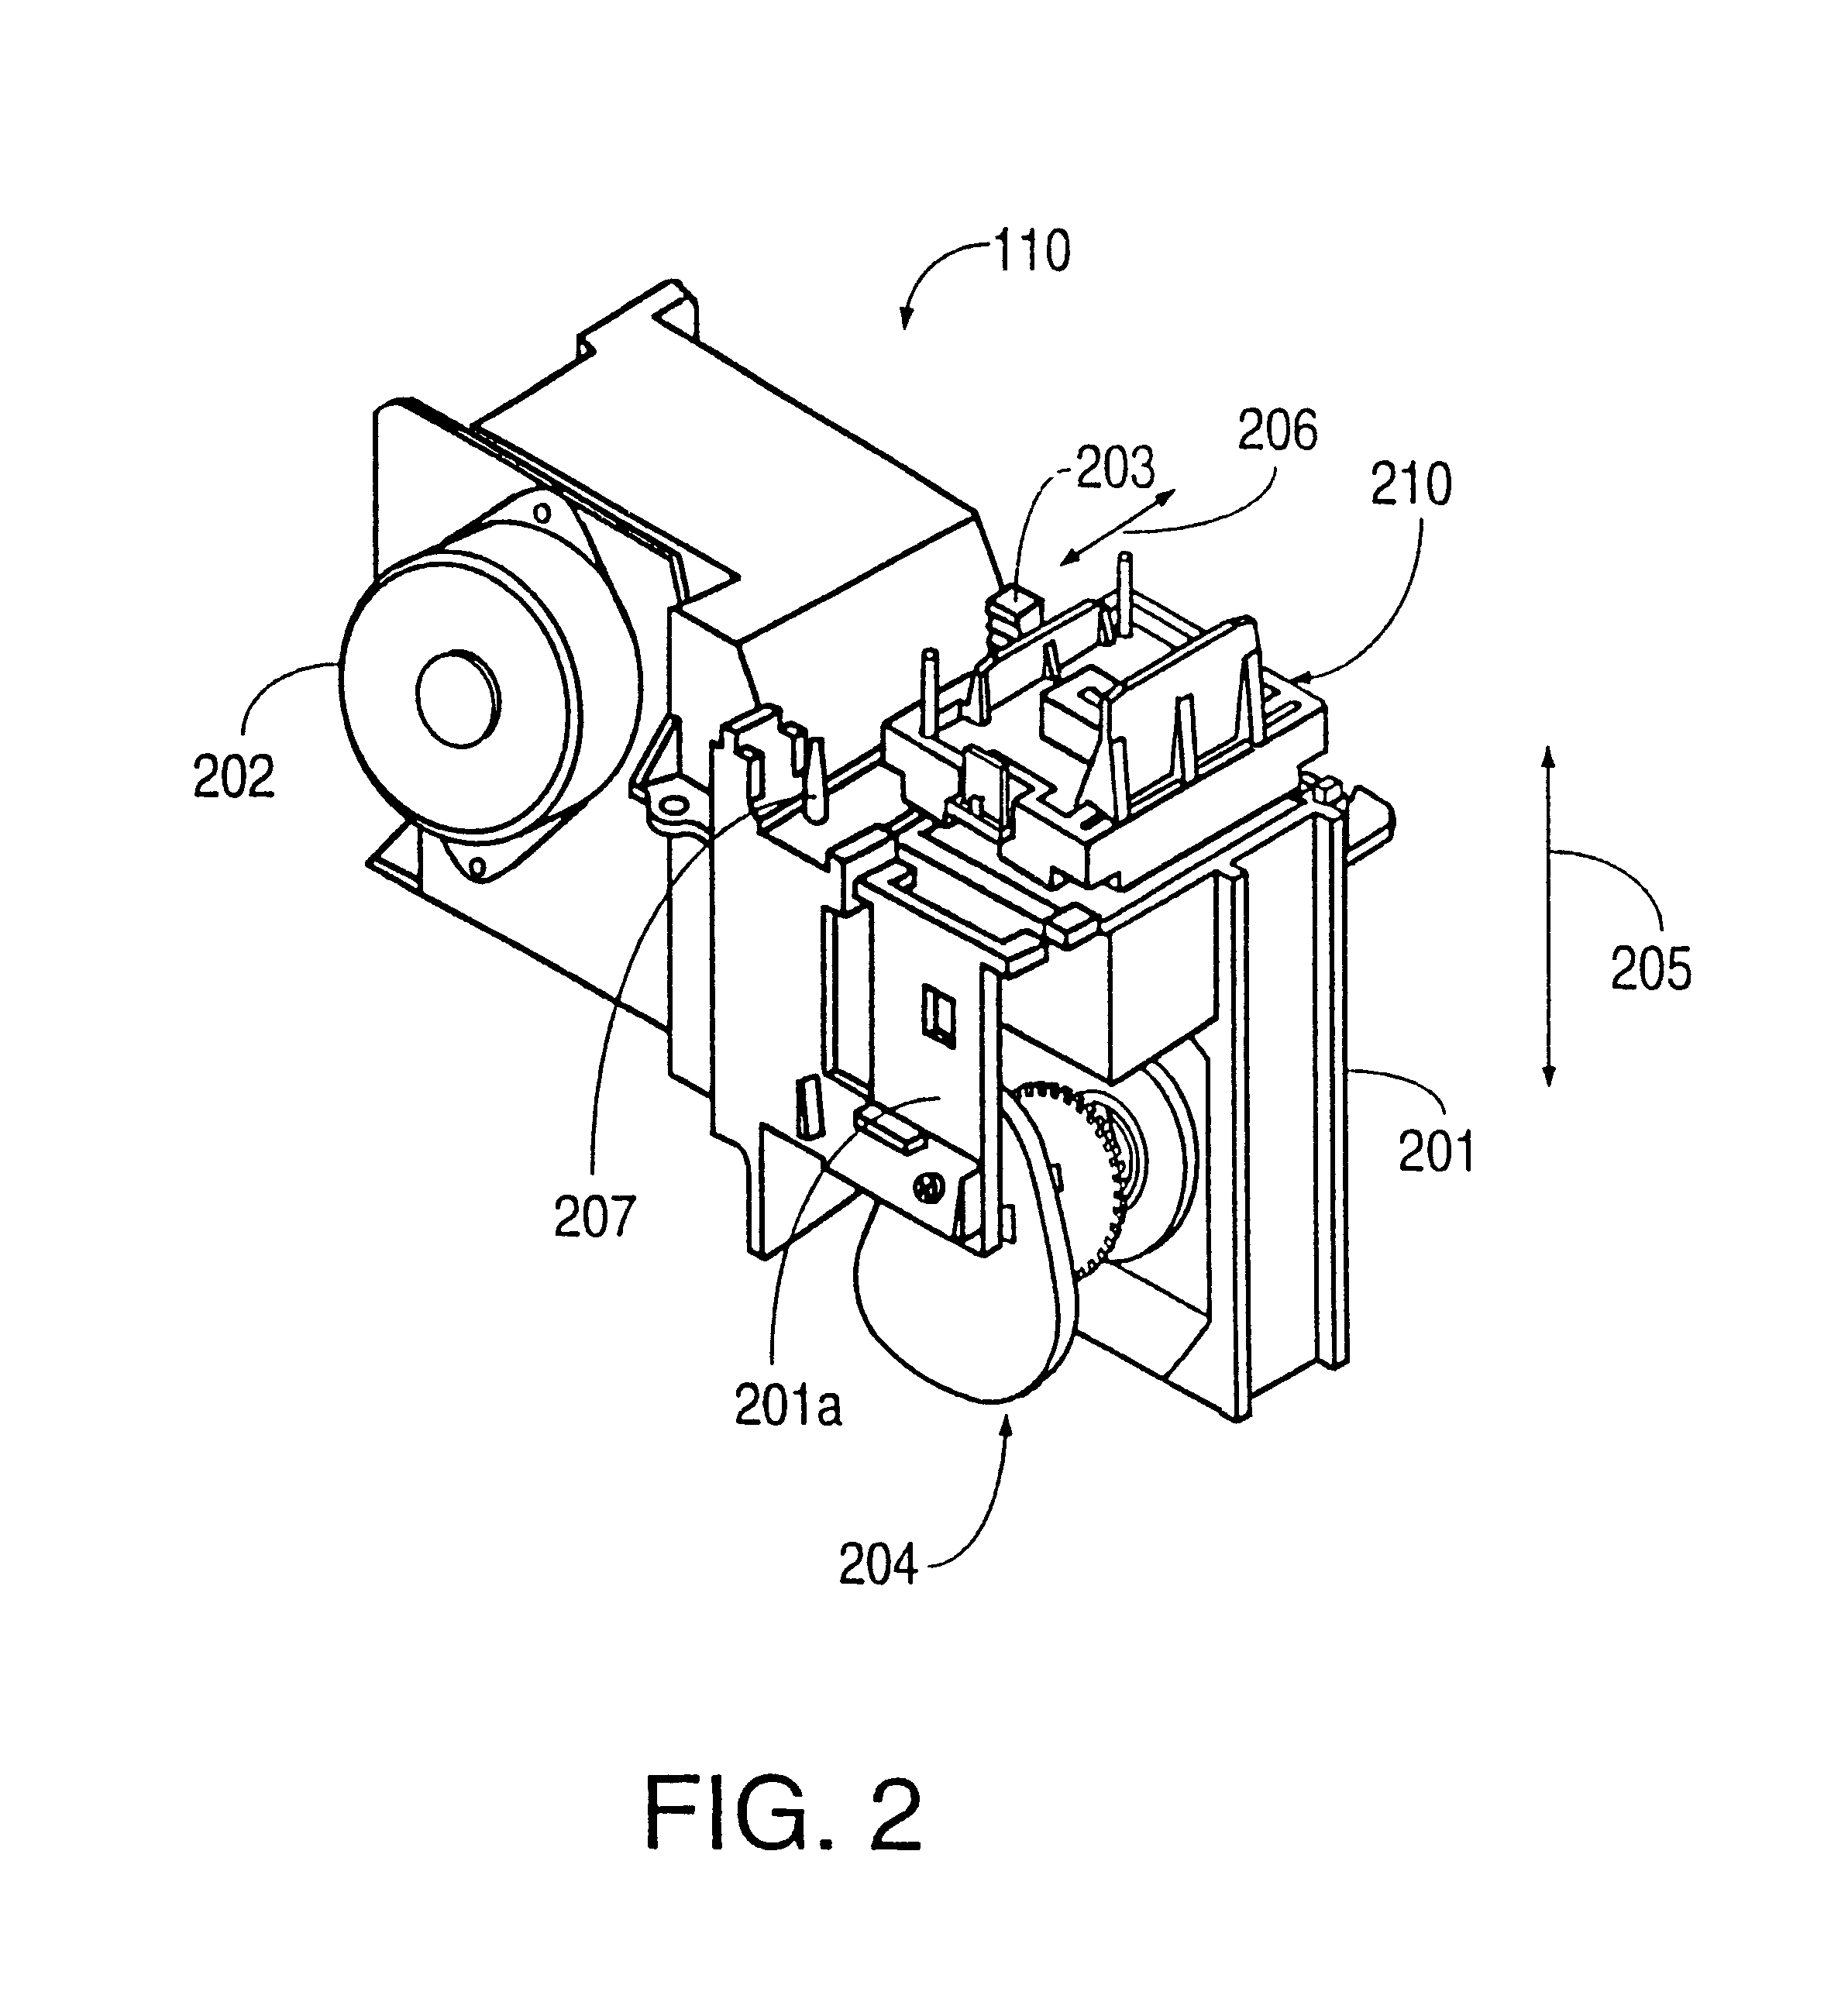 Positioning of service station sled using motor-driven cam